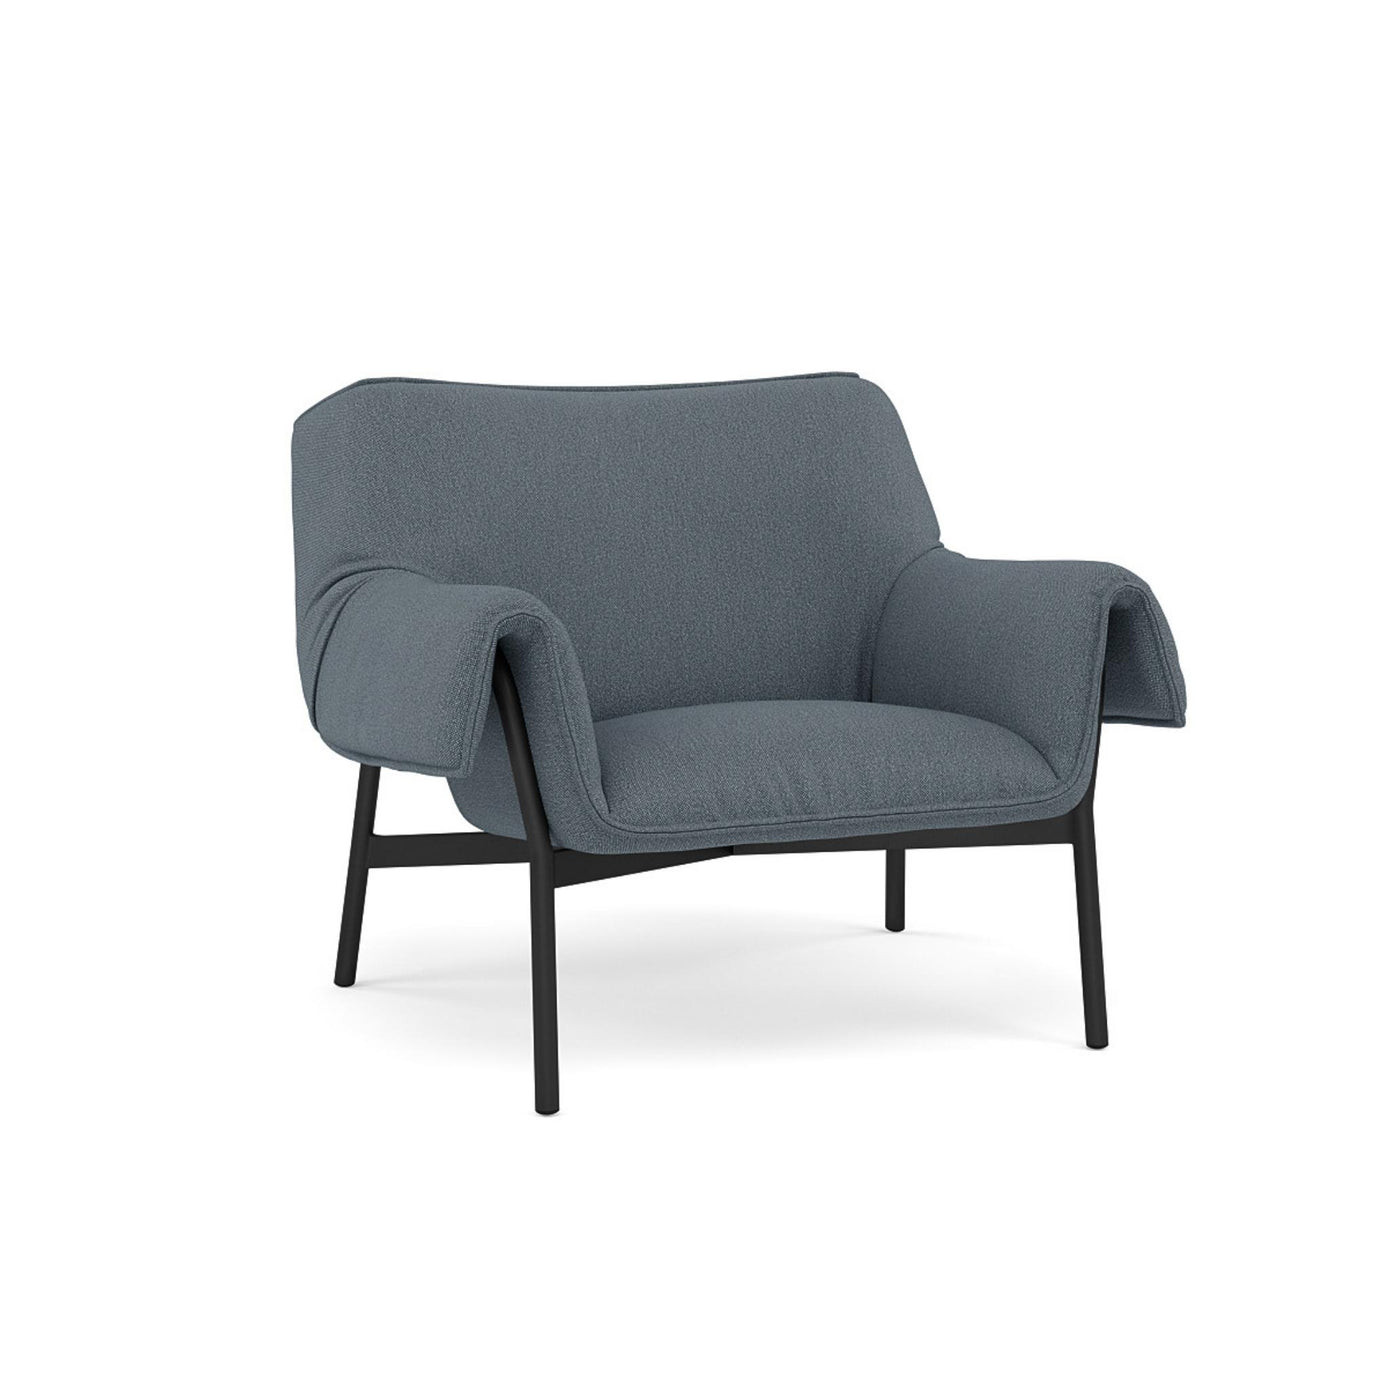 Muuto Wrap Lounge Chair. Made to order from someday designs. #colour_clay-1-blue